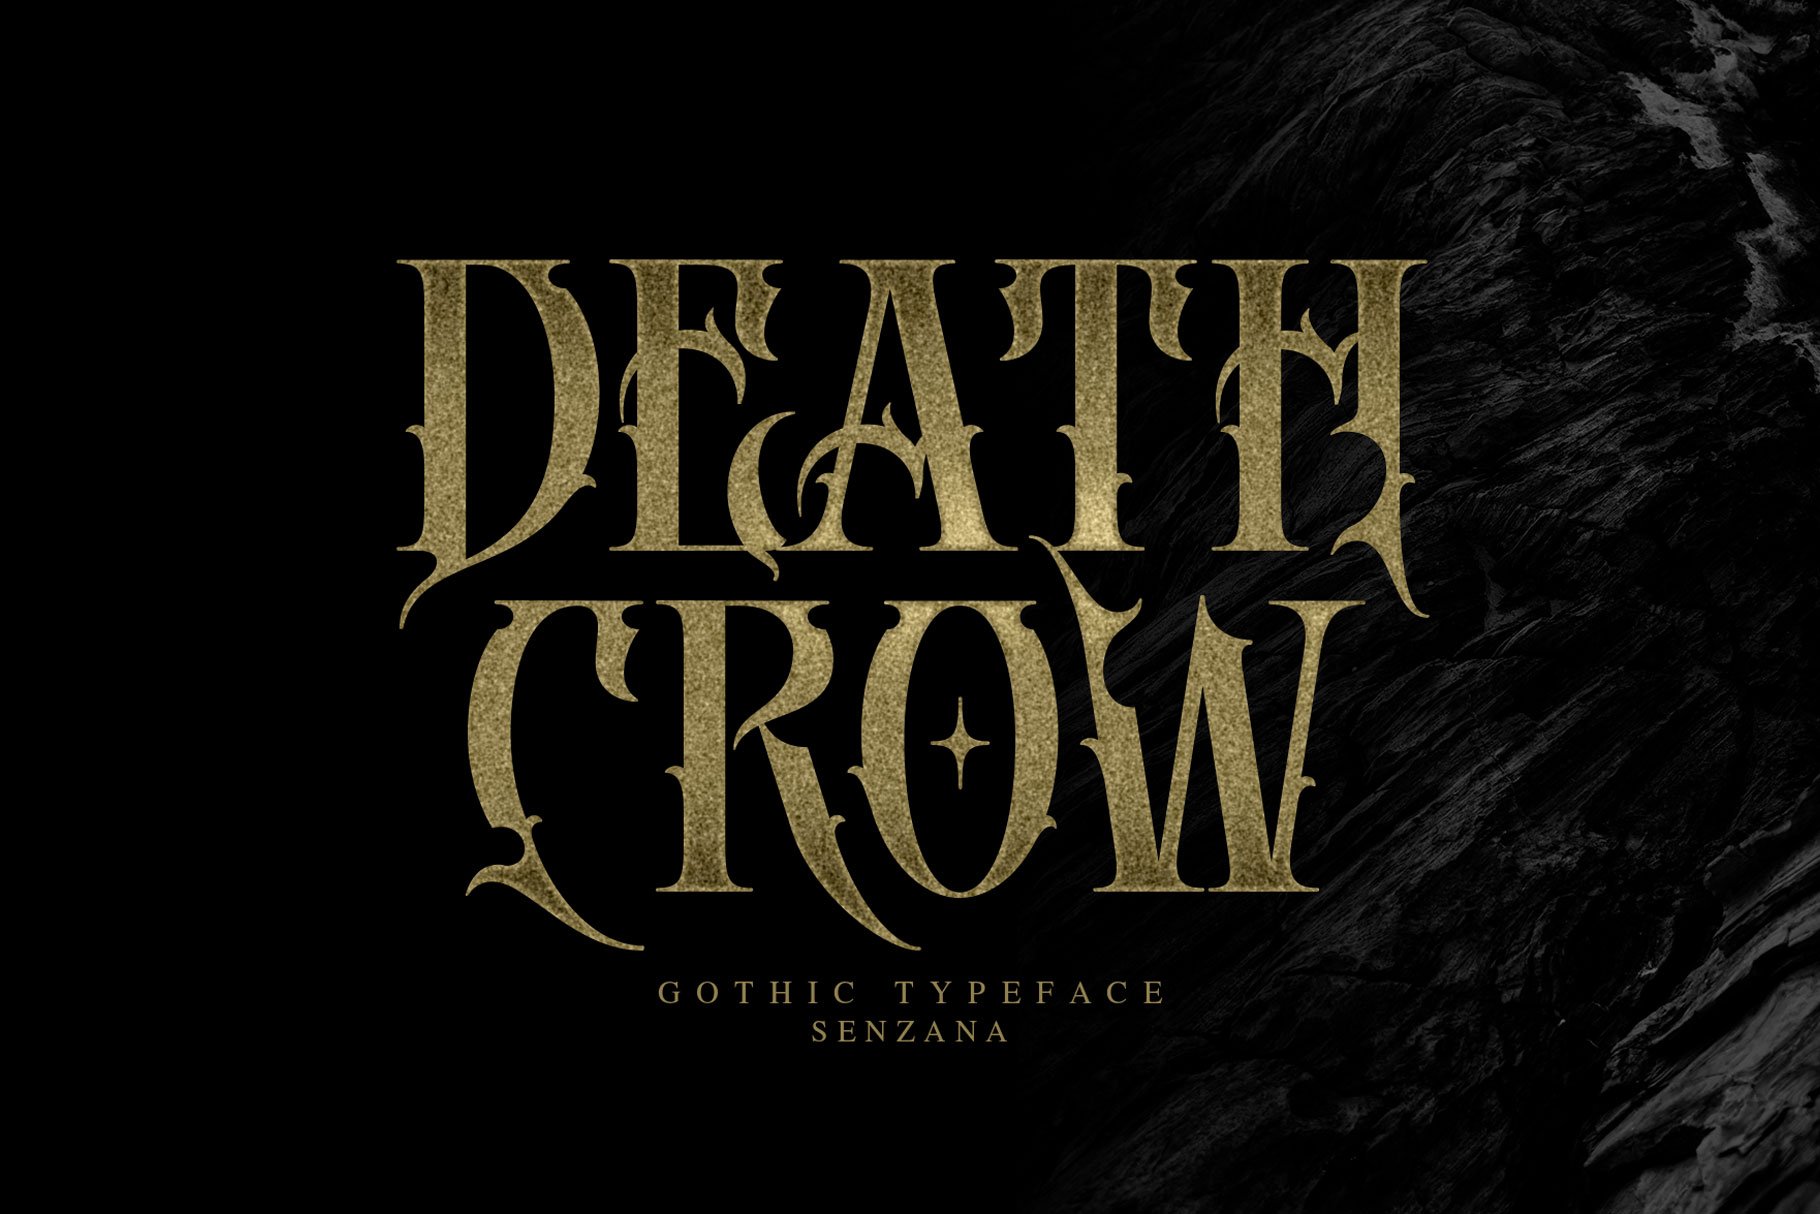 DEATH CROW cover image.